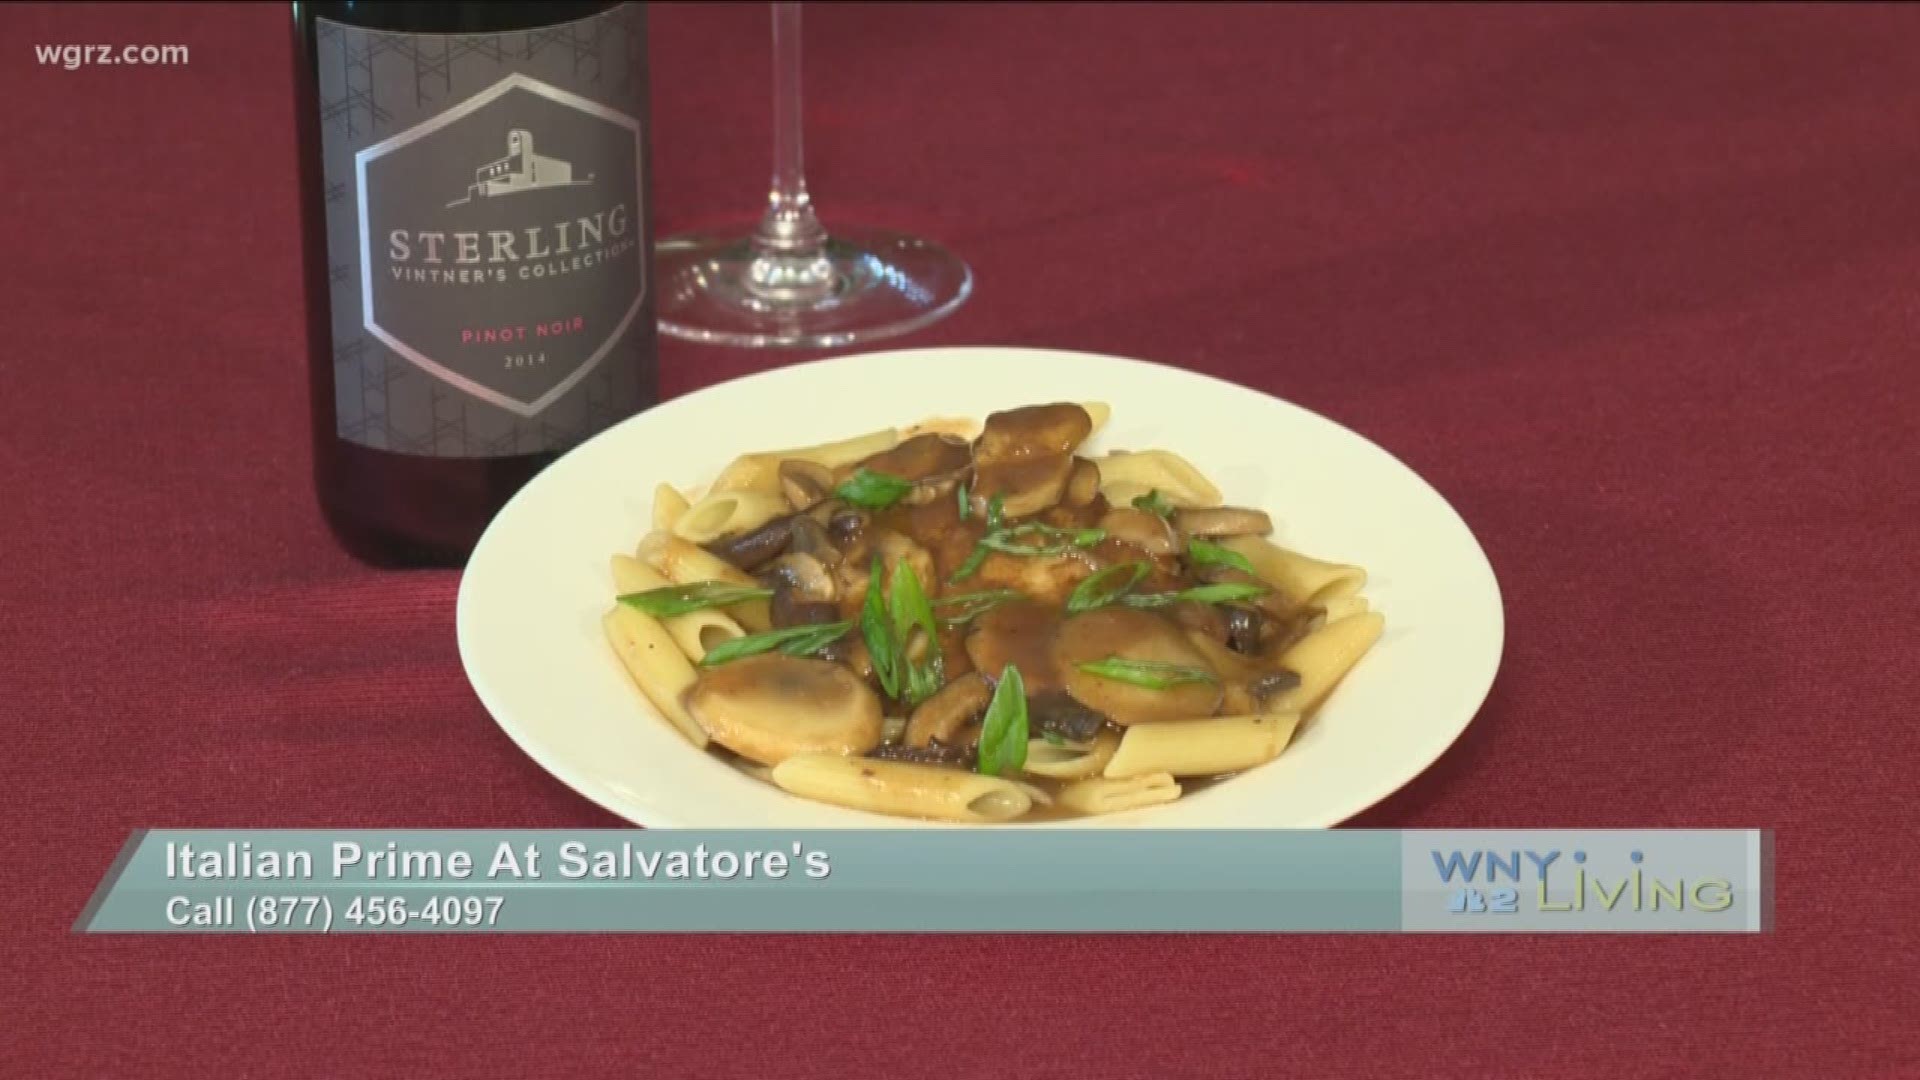 WNY Living - March 18 - Italian Prime At Salvatore's (SPONSORED CONTENT)